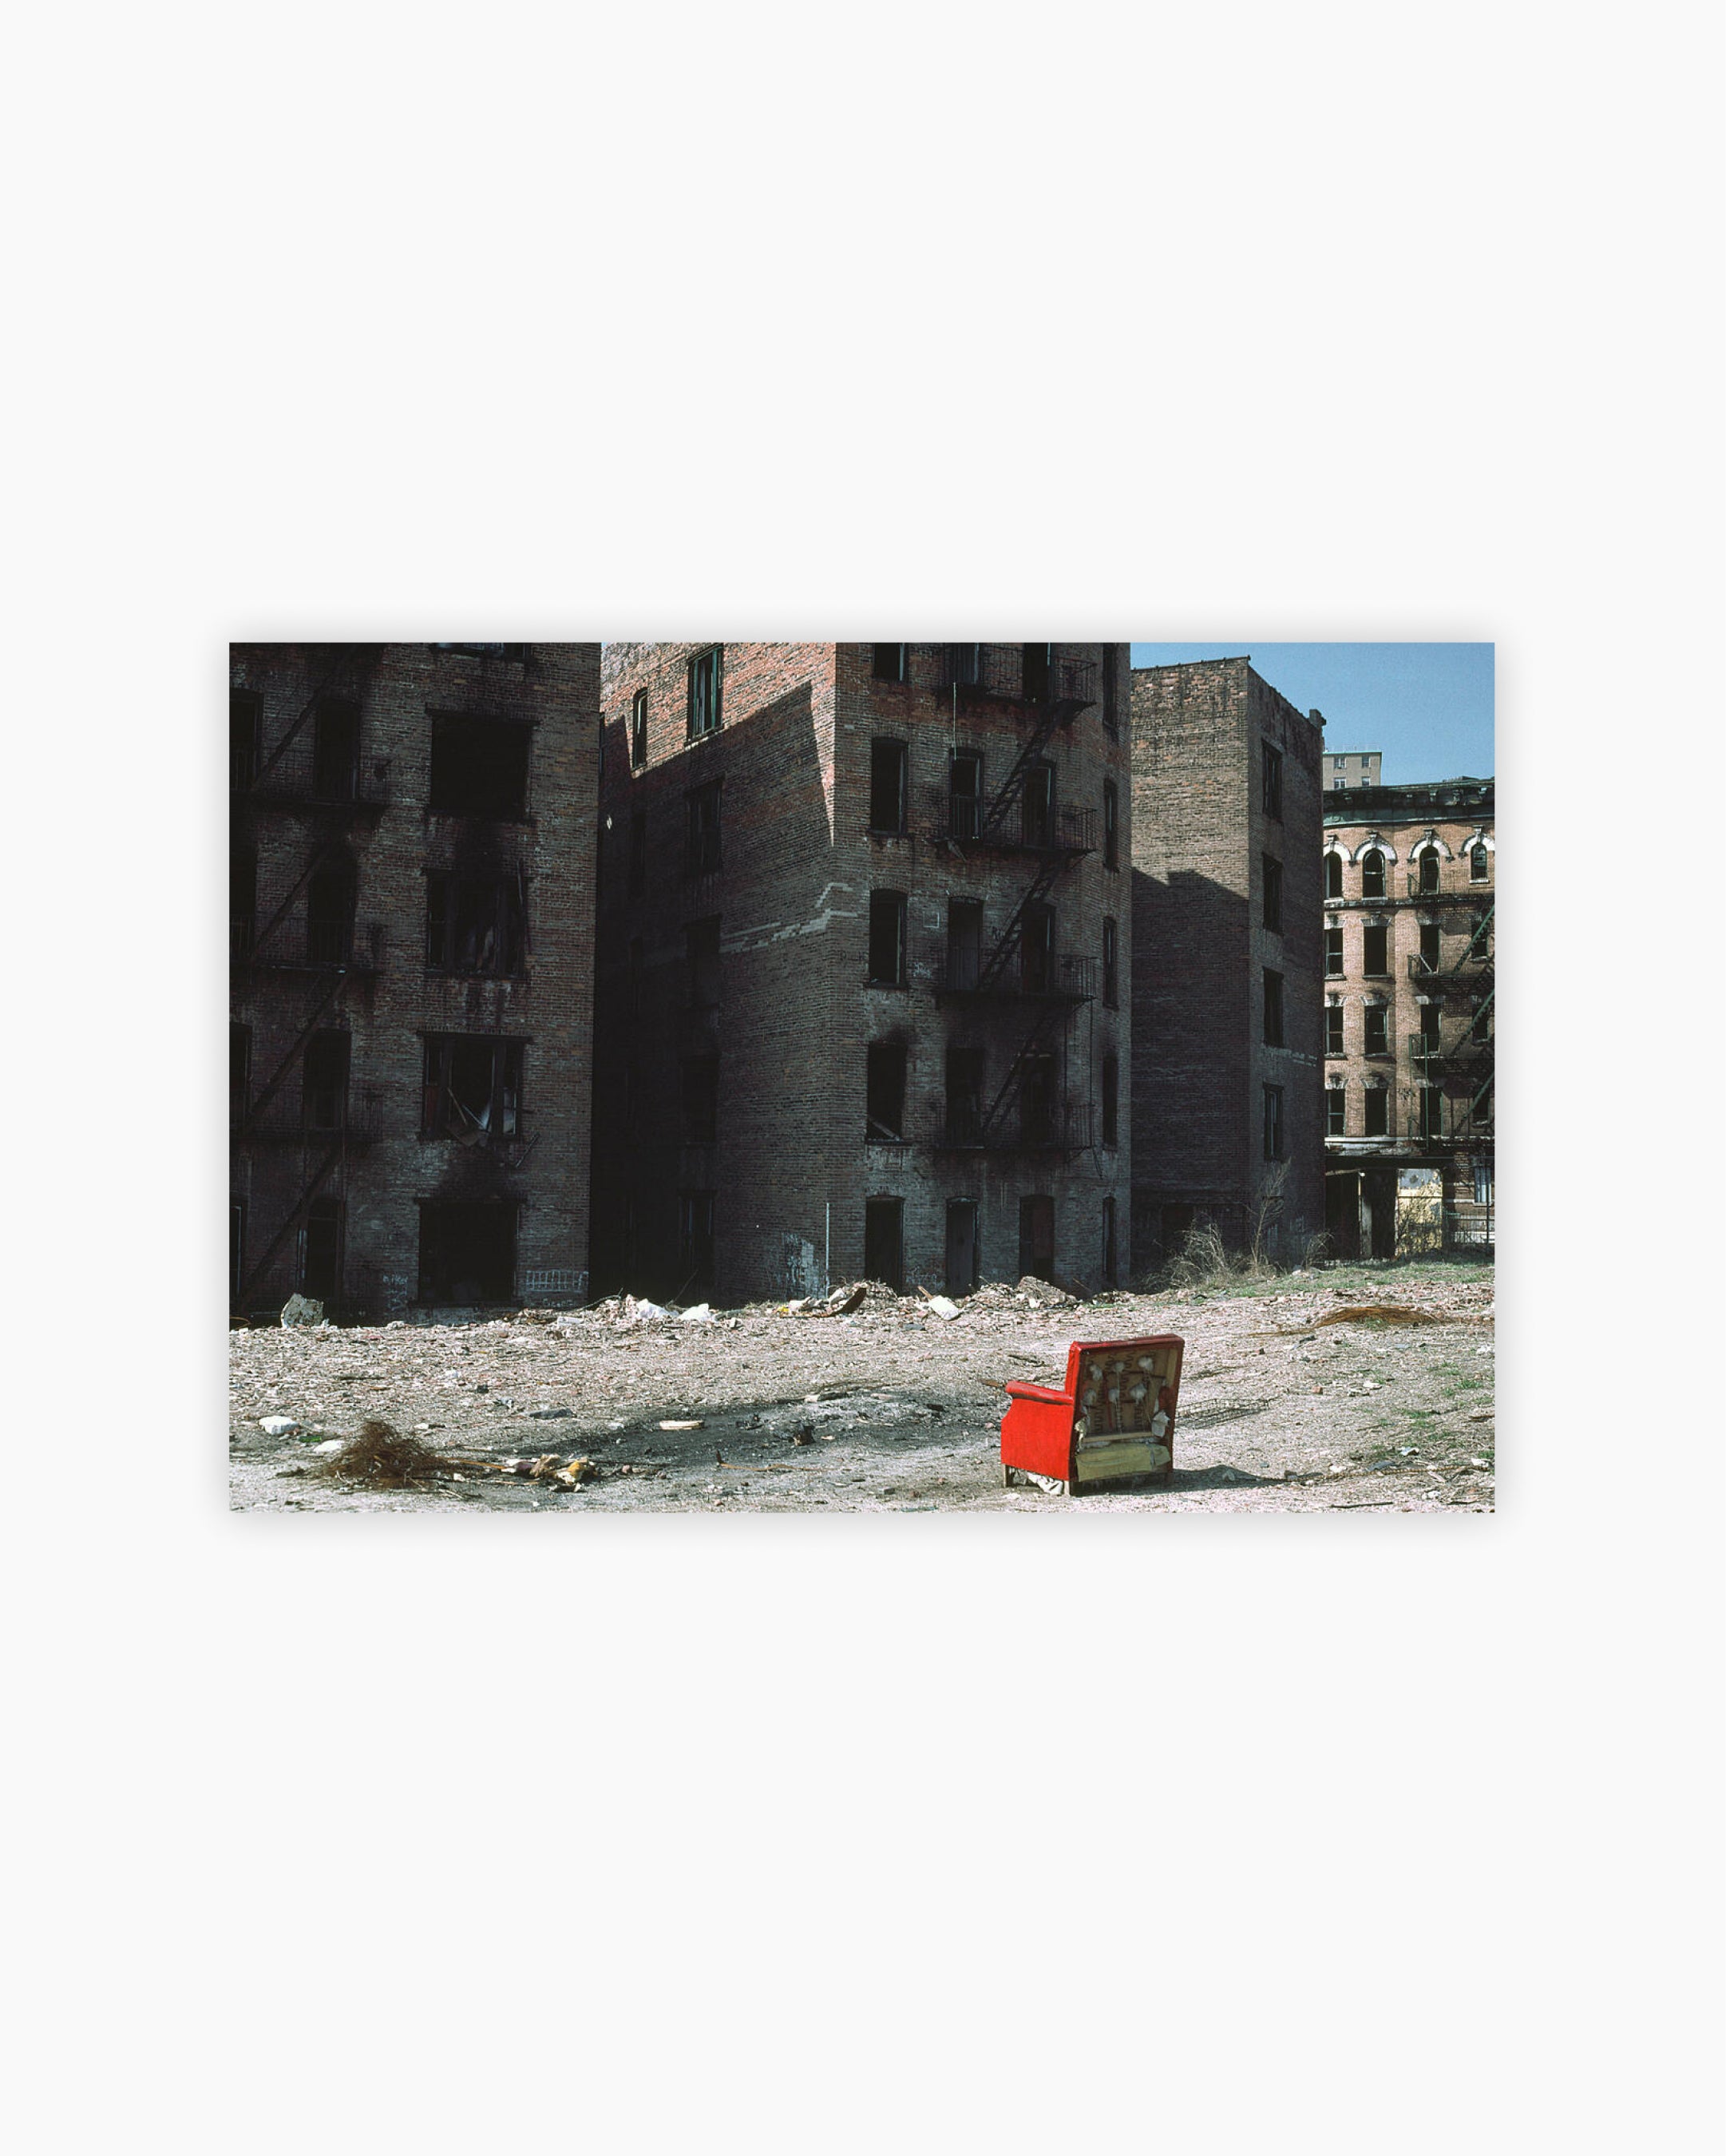 Red chair in front of burned out apartment buildings. Bronx, New York City, USA, 1983